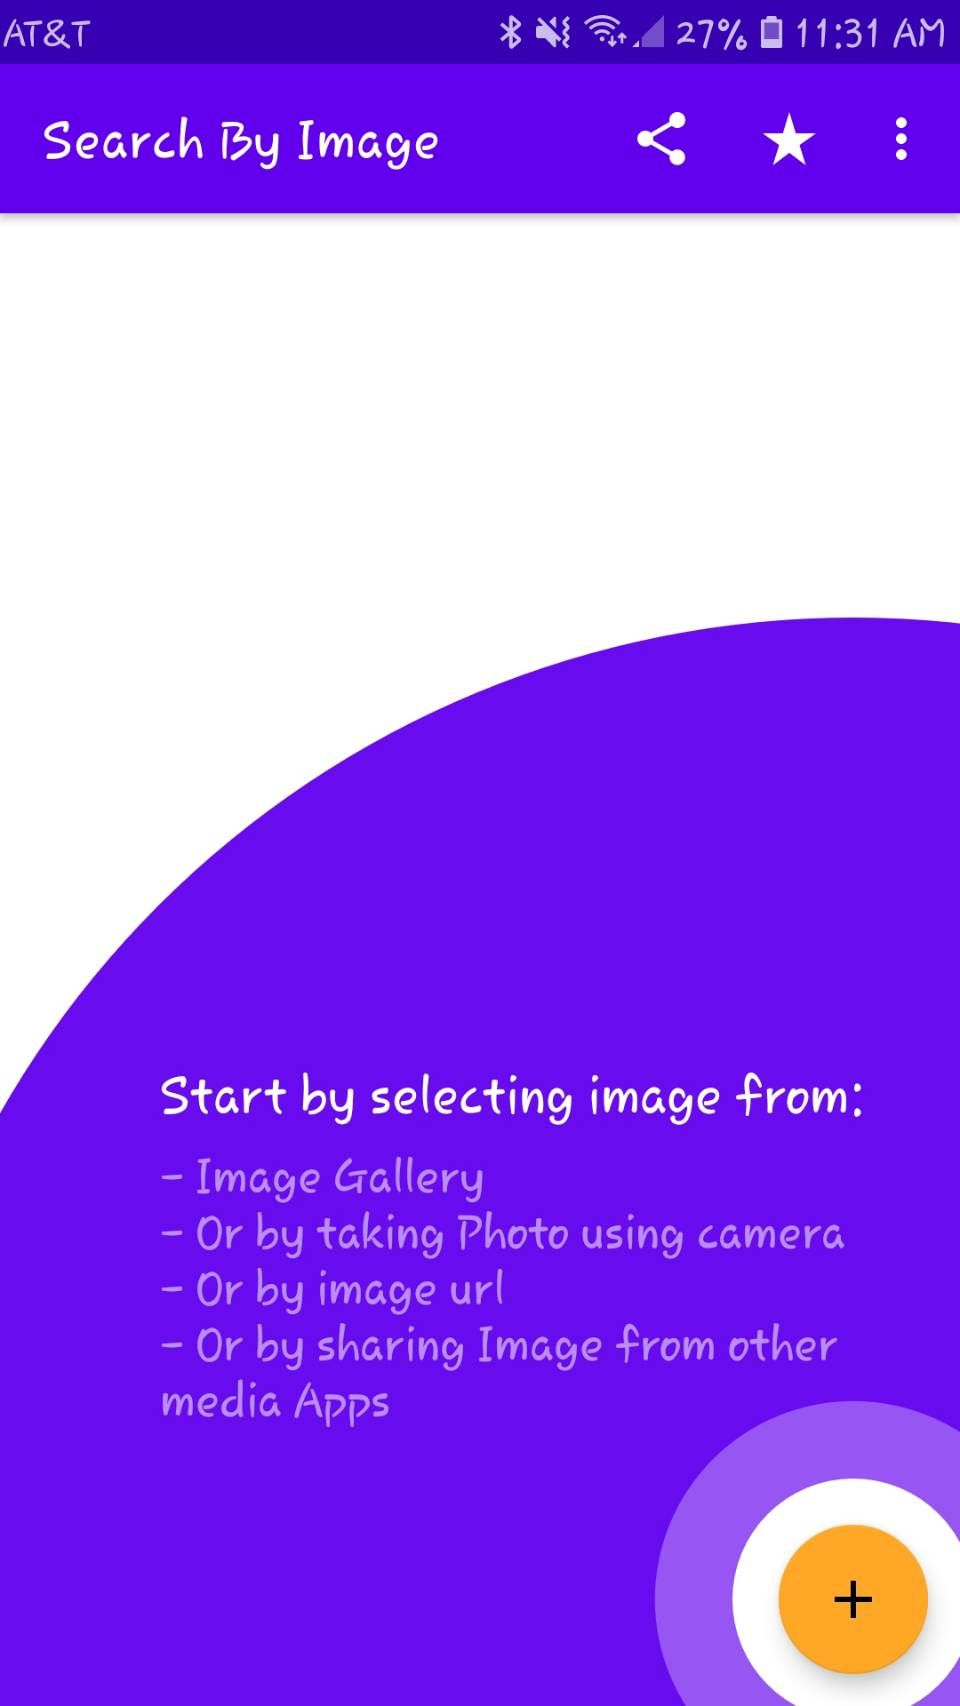 Search by Image launch screen